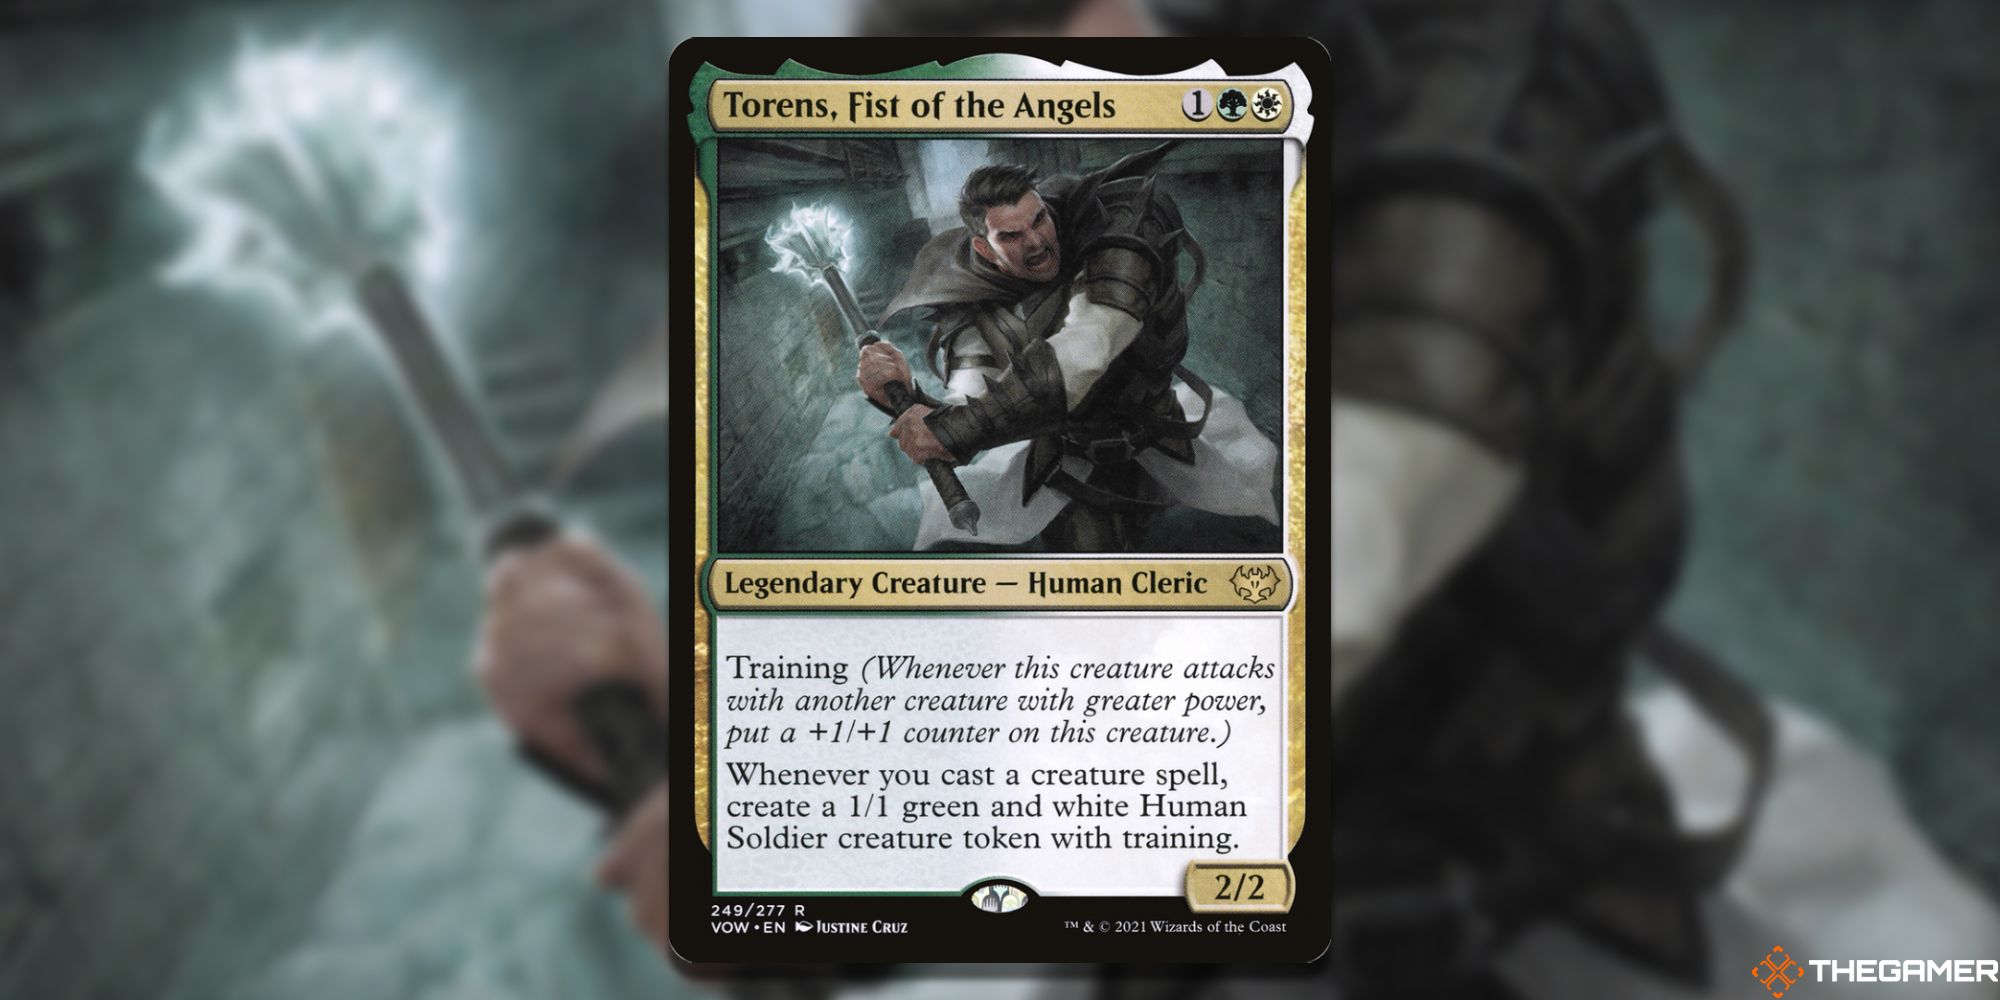 Image of the Torens, Fist of the Angels card in Magic: The Gathering, with art by Justine Cruz